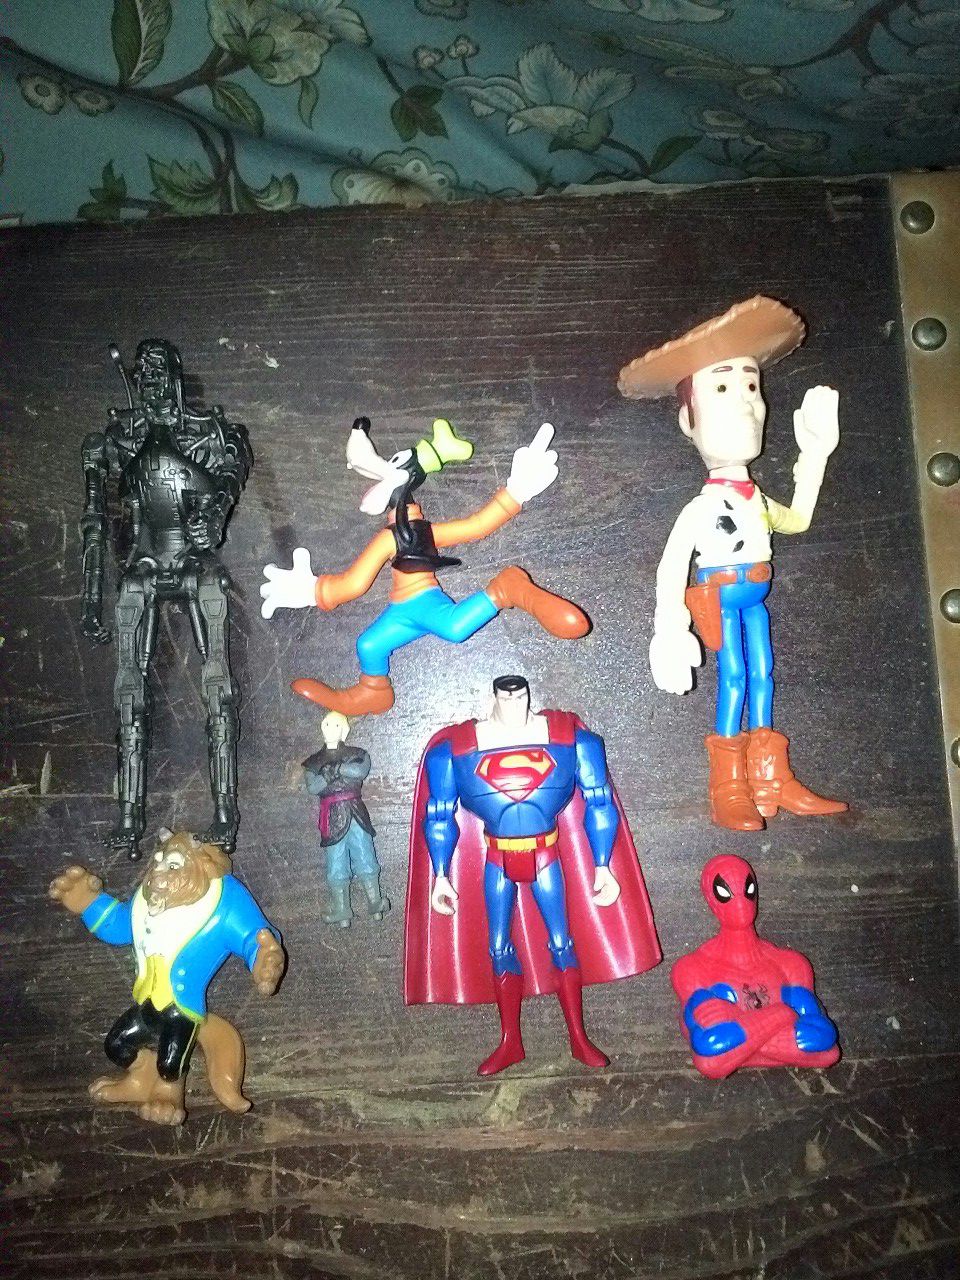 Cool collectable toys